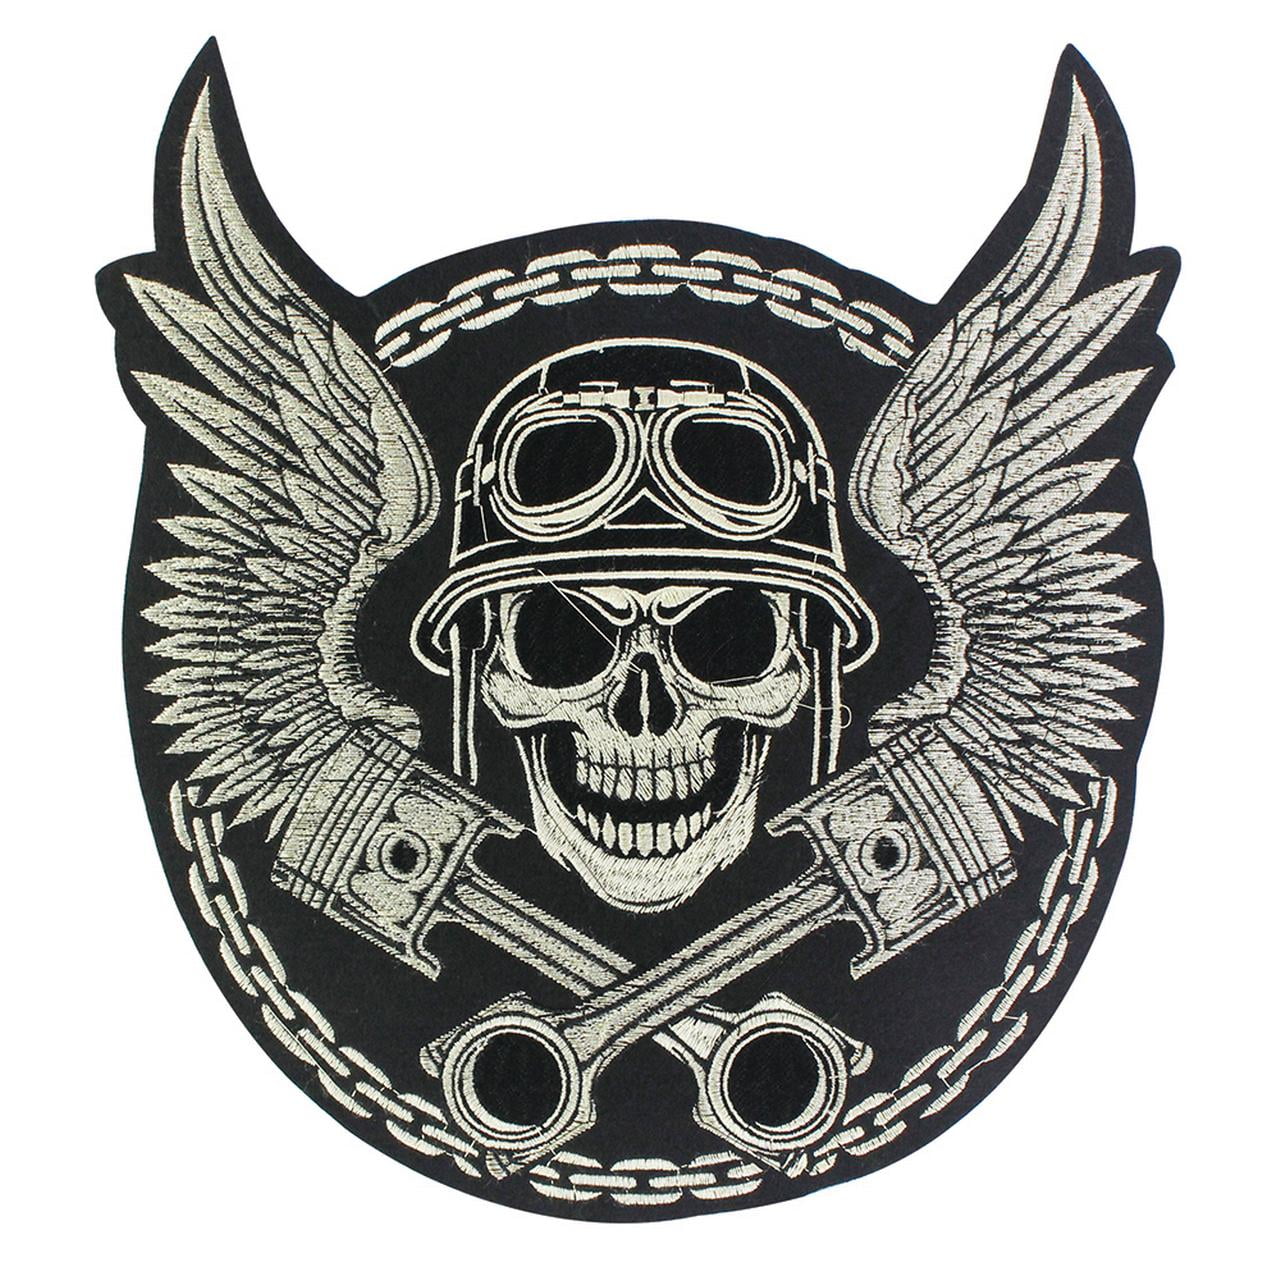 Skull Red Roses Racing Motorcycle Biker Iron on Embroidered Large Back patch XL